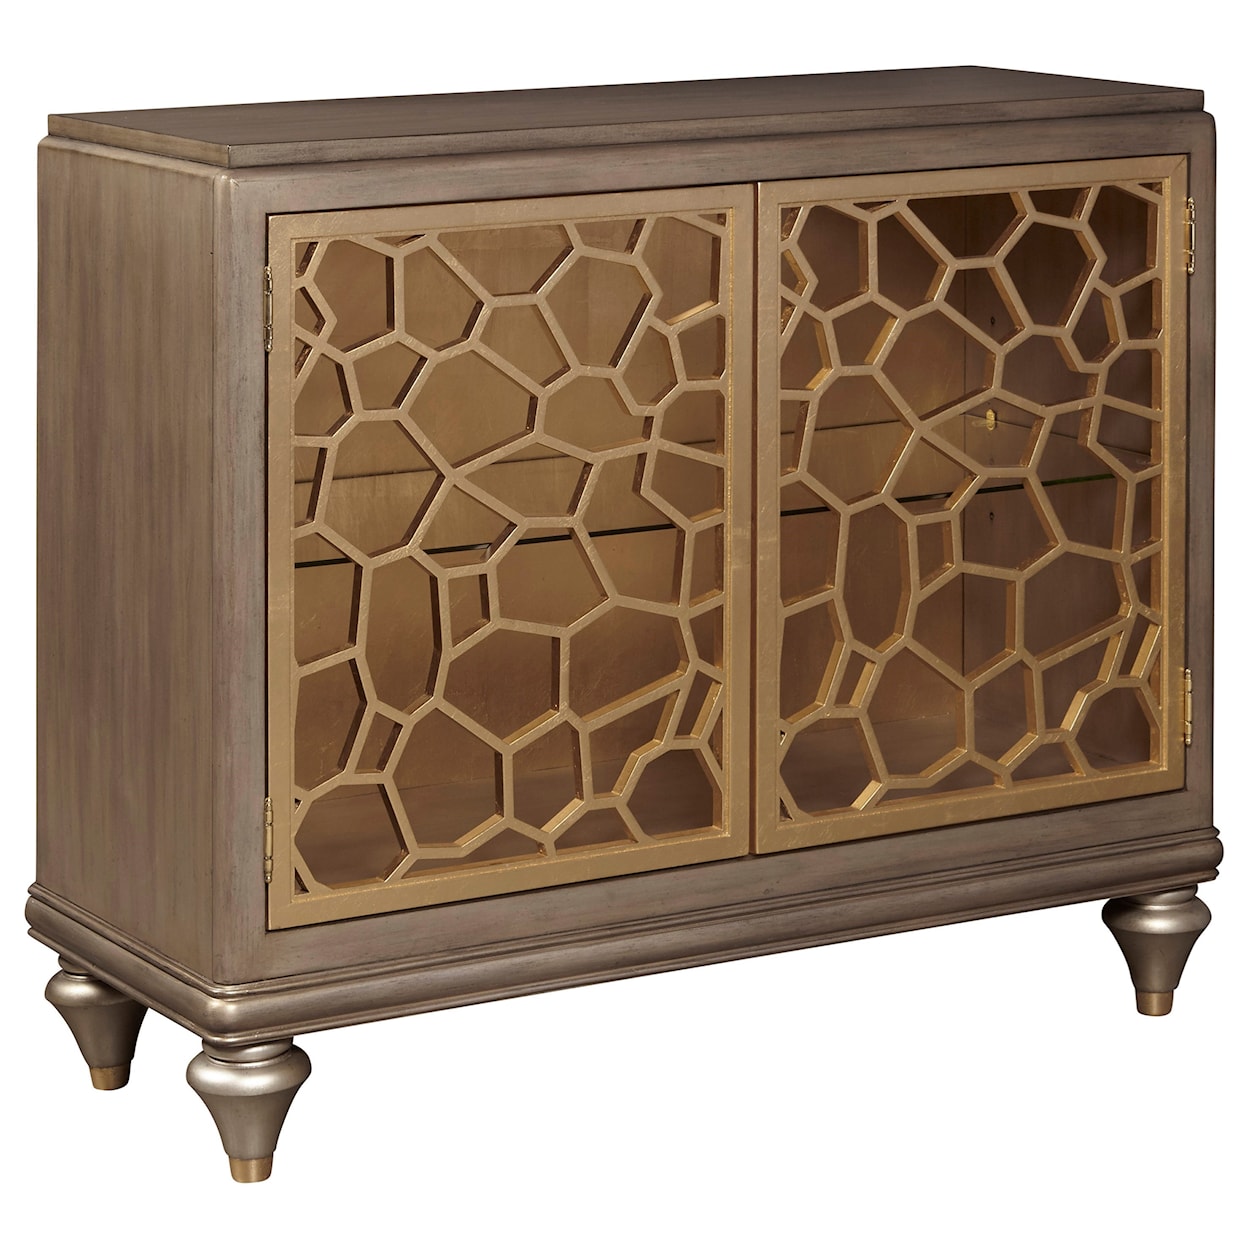 Accentrics Home City Chic Accent Chest